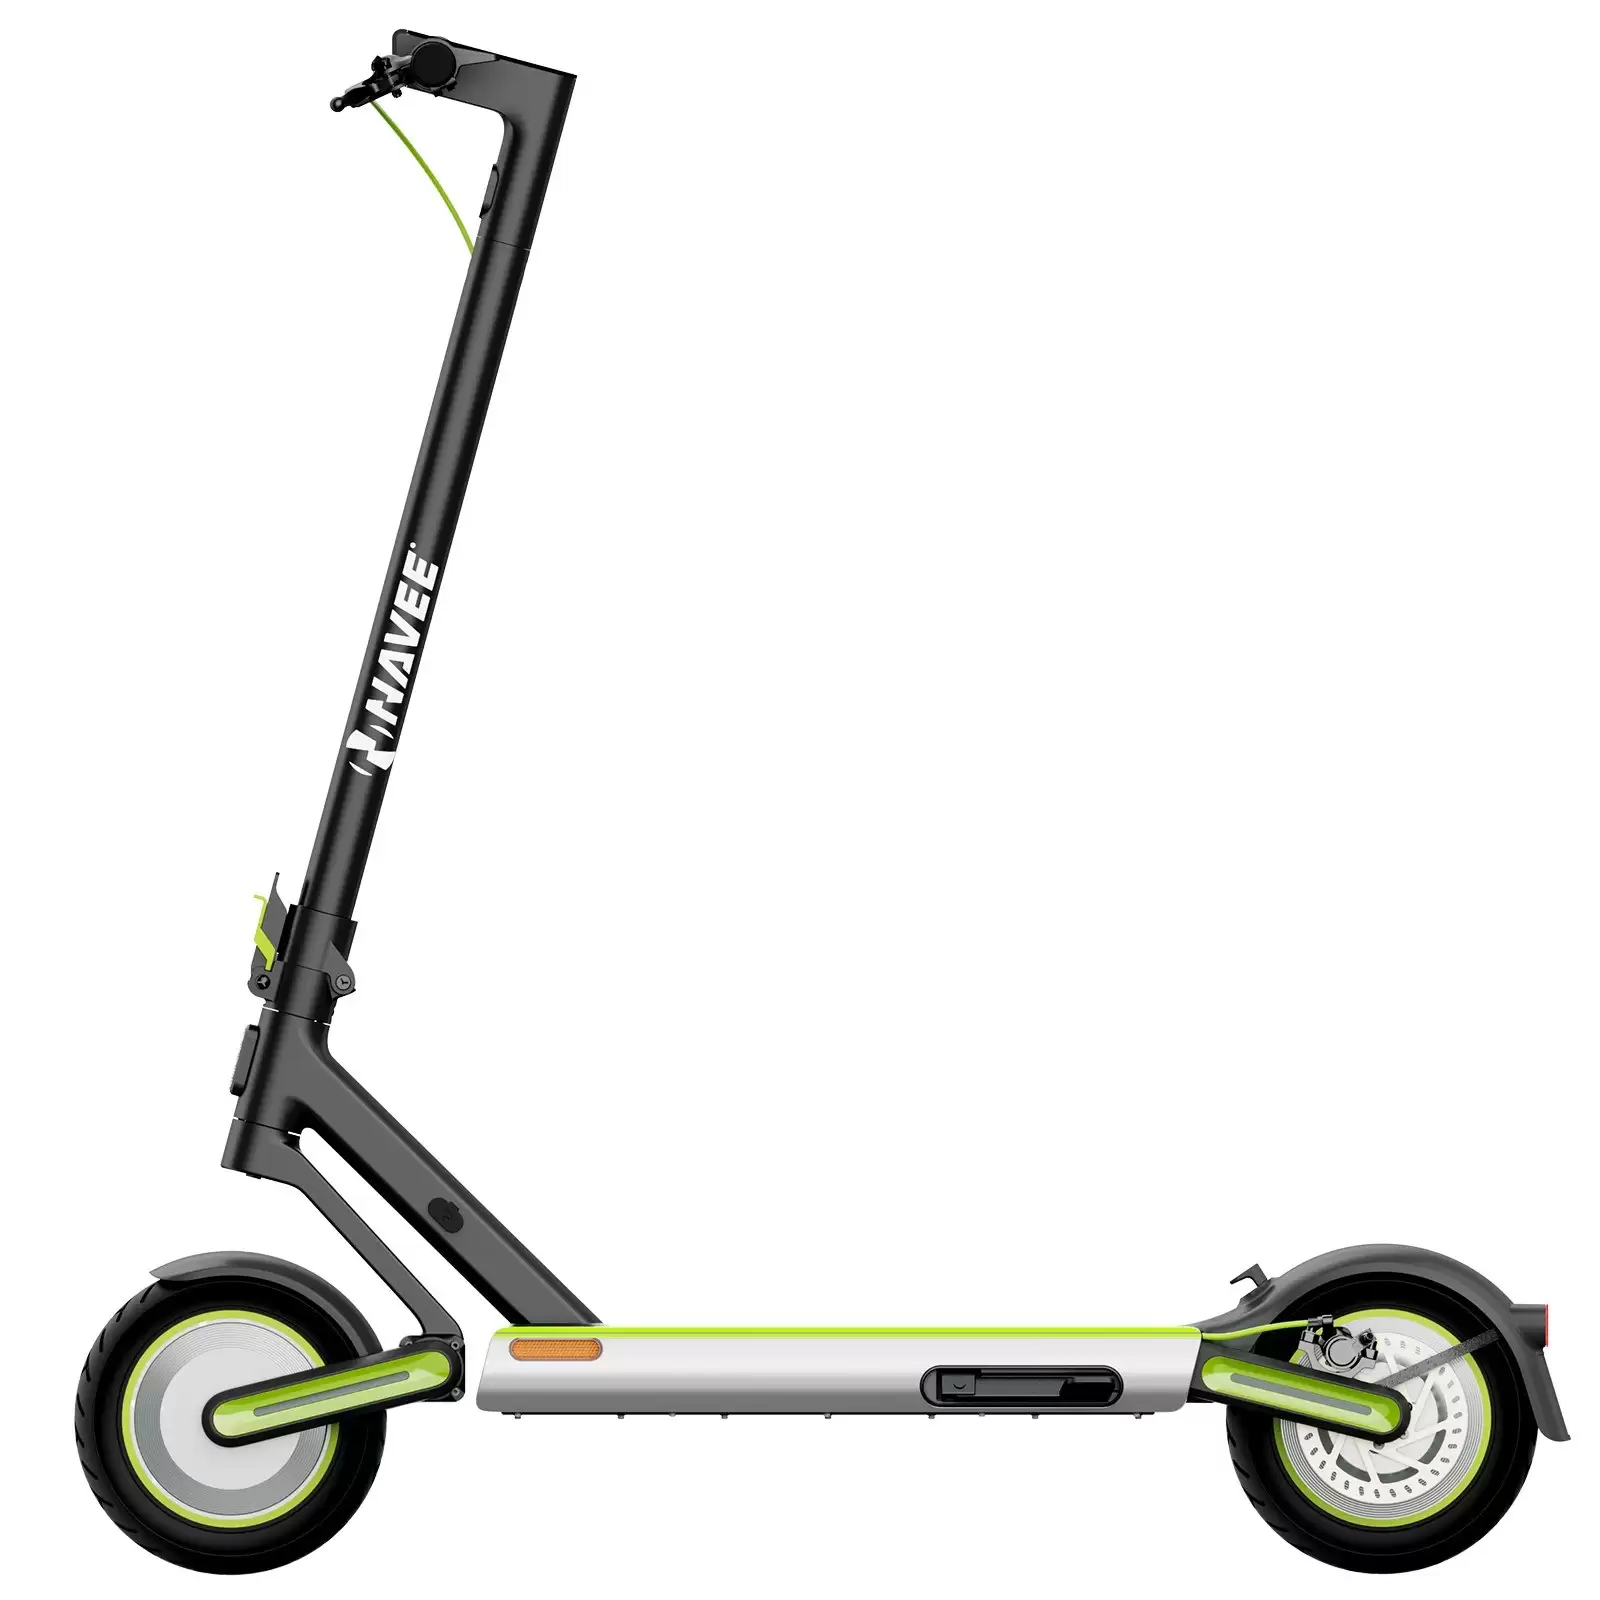 Order In Just €559 Navee S65 500w Geared Motor Electric Scooter With This Discount Coupon At Cafago